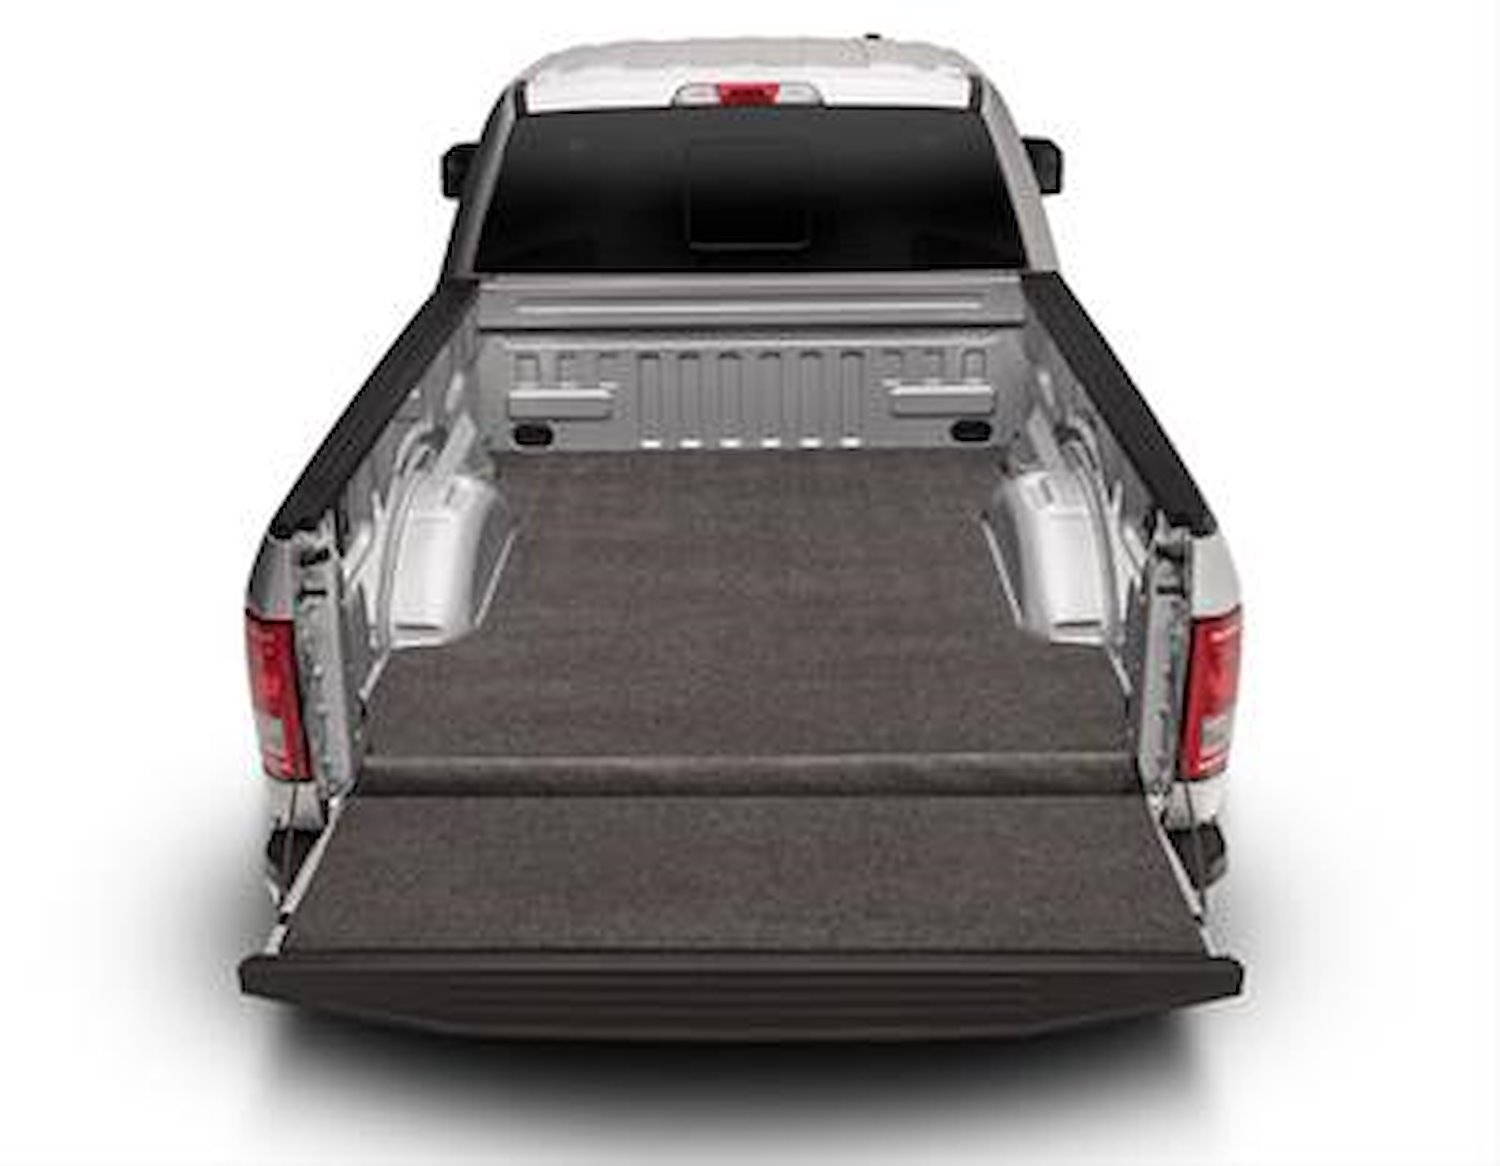 XLTBMY05SBS XLT BEDMAT FOR SPRAY-IN OR NO BED LINER 05+ TOYOTA TACOMA 6' BED